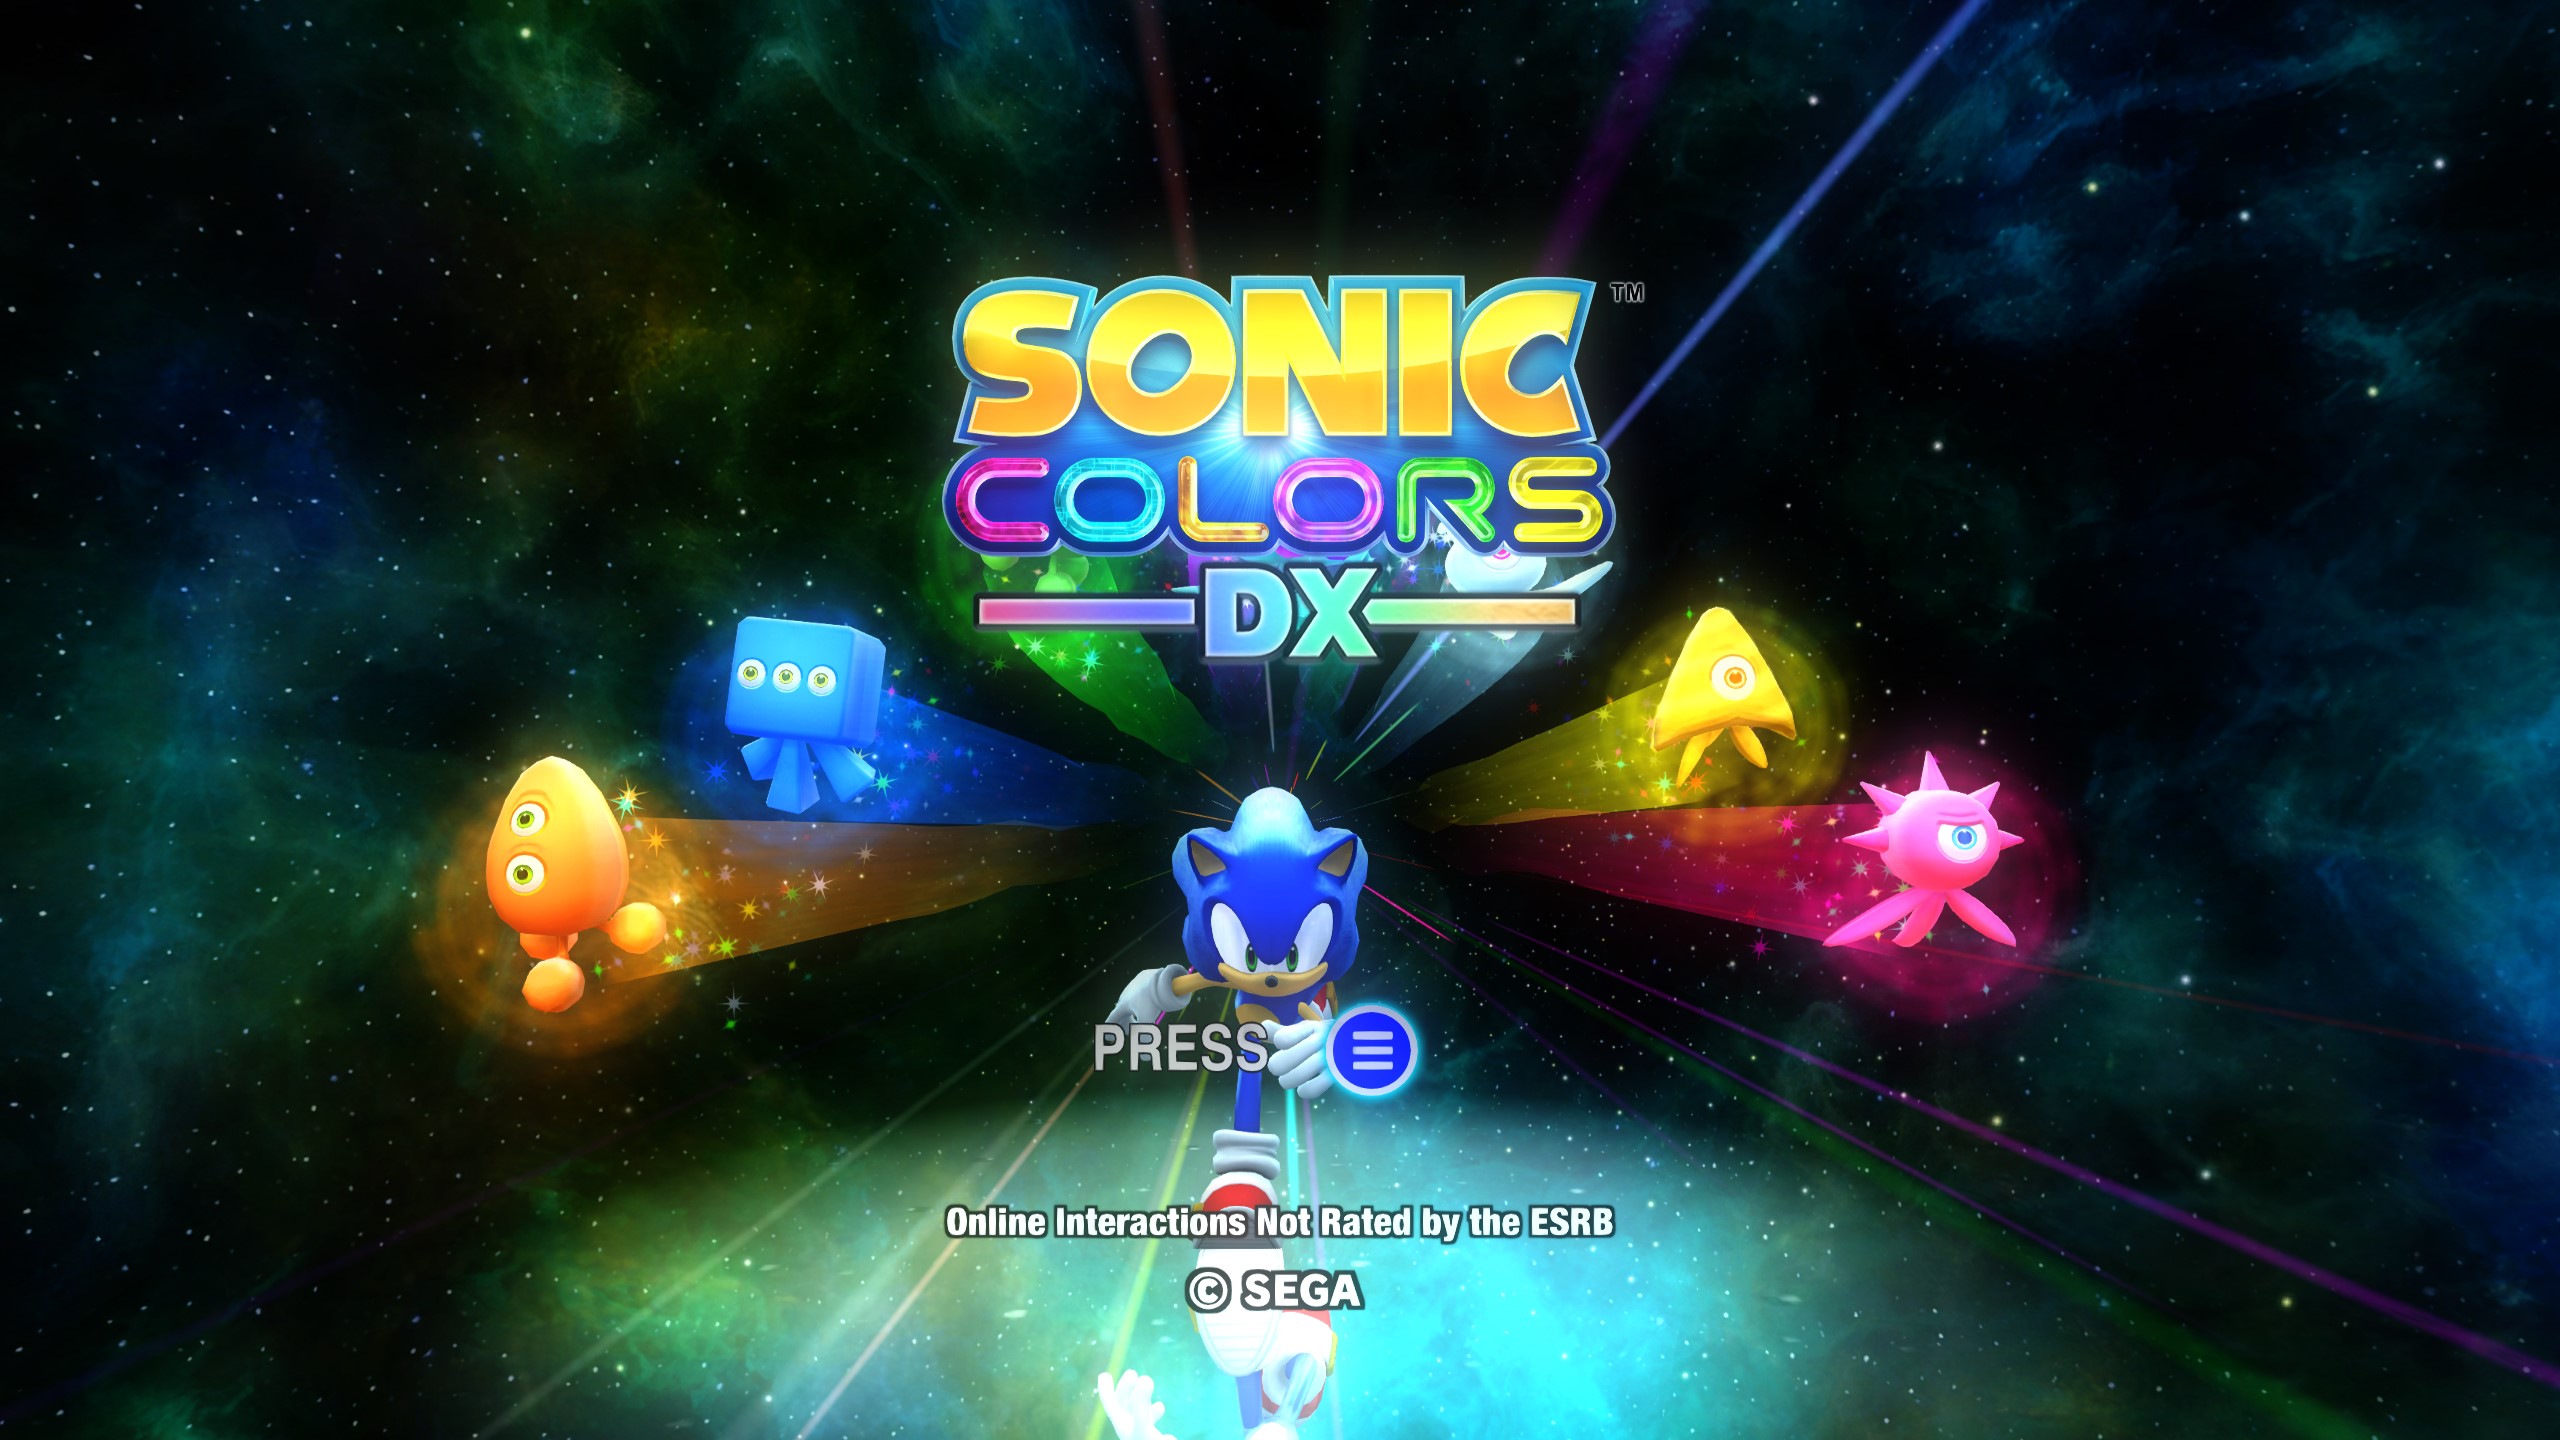 High Res UI for Sonic Colors [Sonic Colors] [Mods]